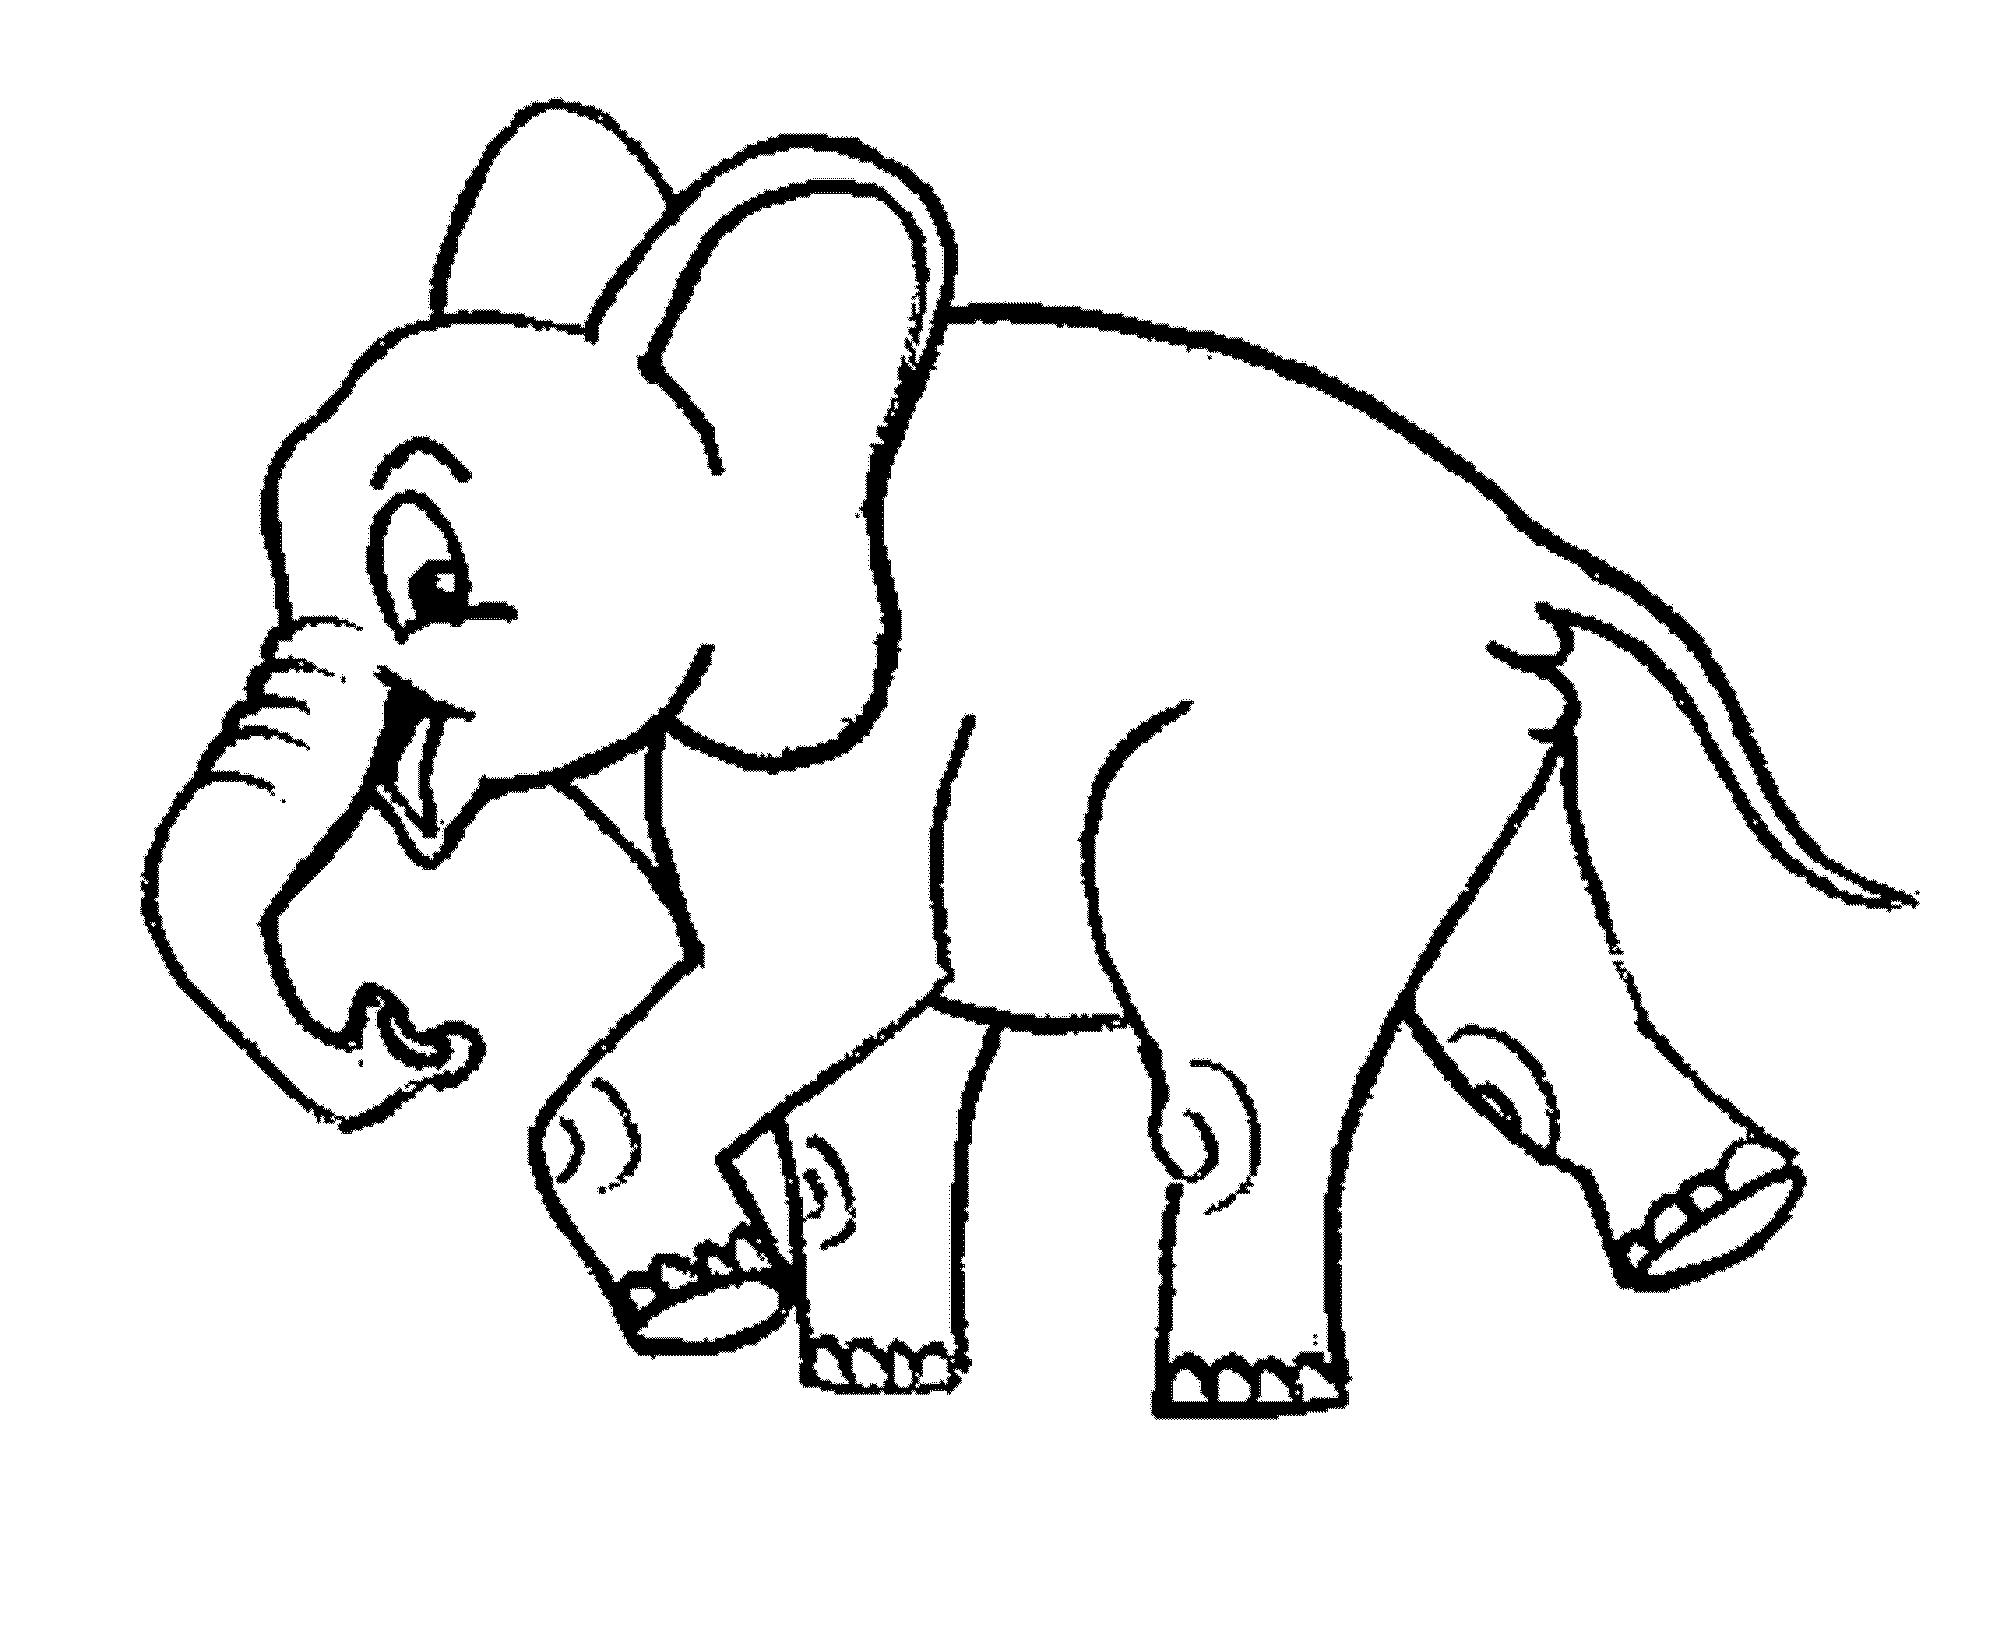 Elephant Coloring Pages For Preschool Teaching Kids Through Elephant Coloring Pages Best Apps For Kids